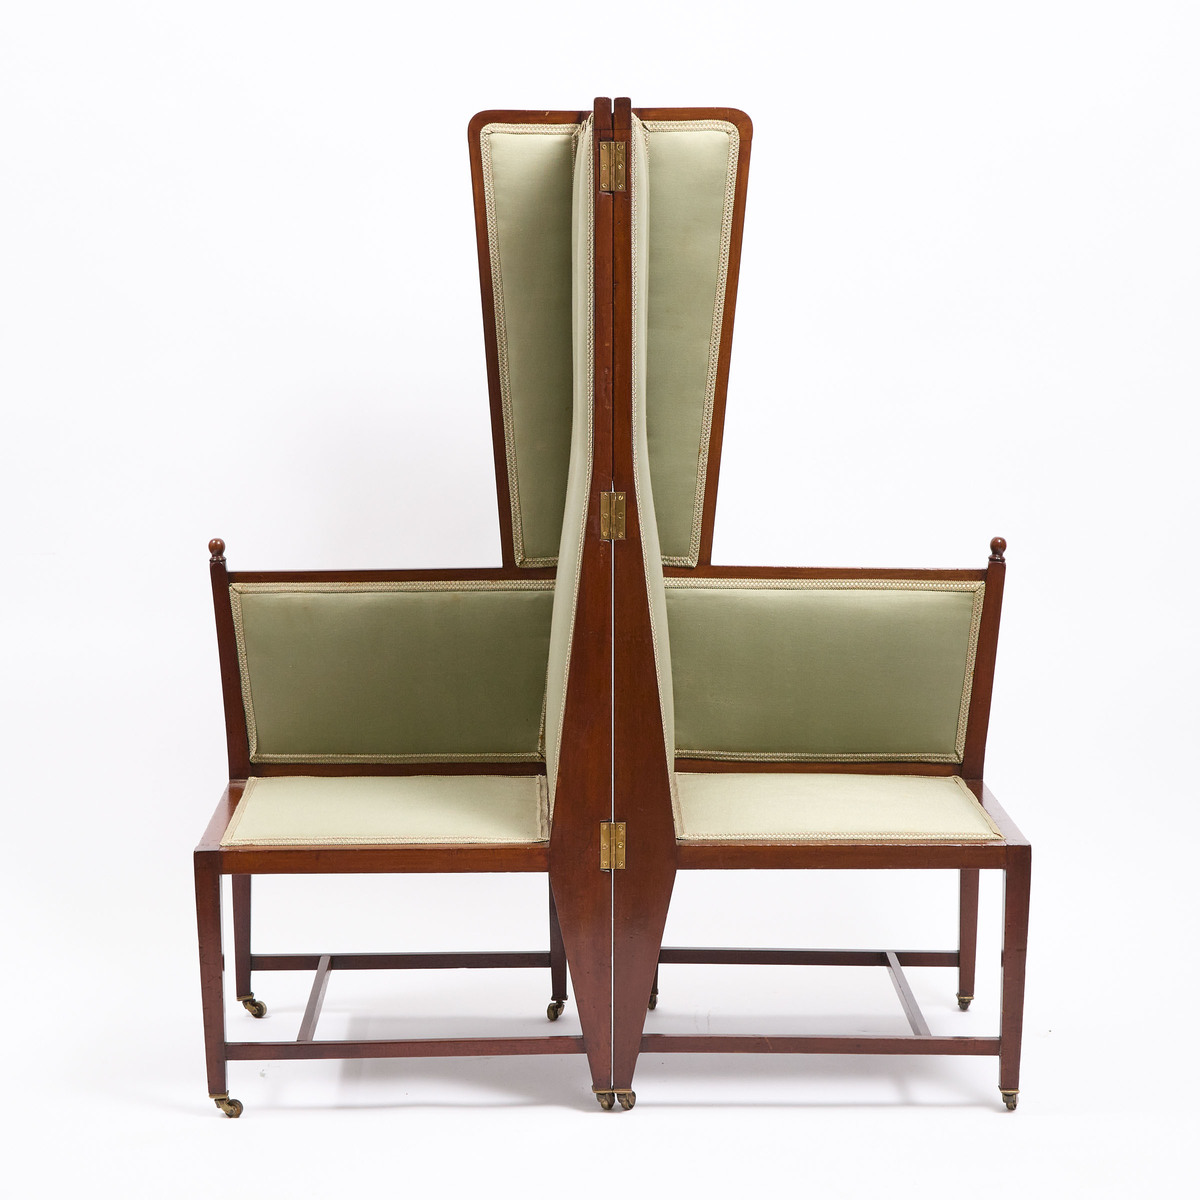 George Logan for Wylie and Lochhead Pewter and Brass Inlaid Mahogany Folding Settle, c.1900, 55.5 x - Image 3 of 3